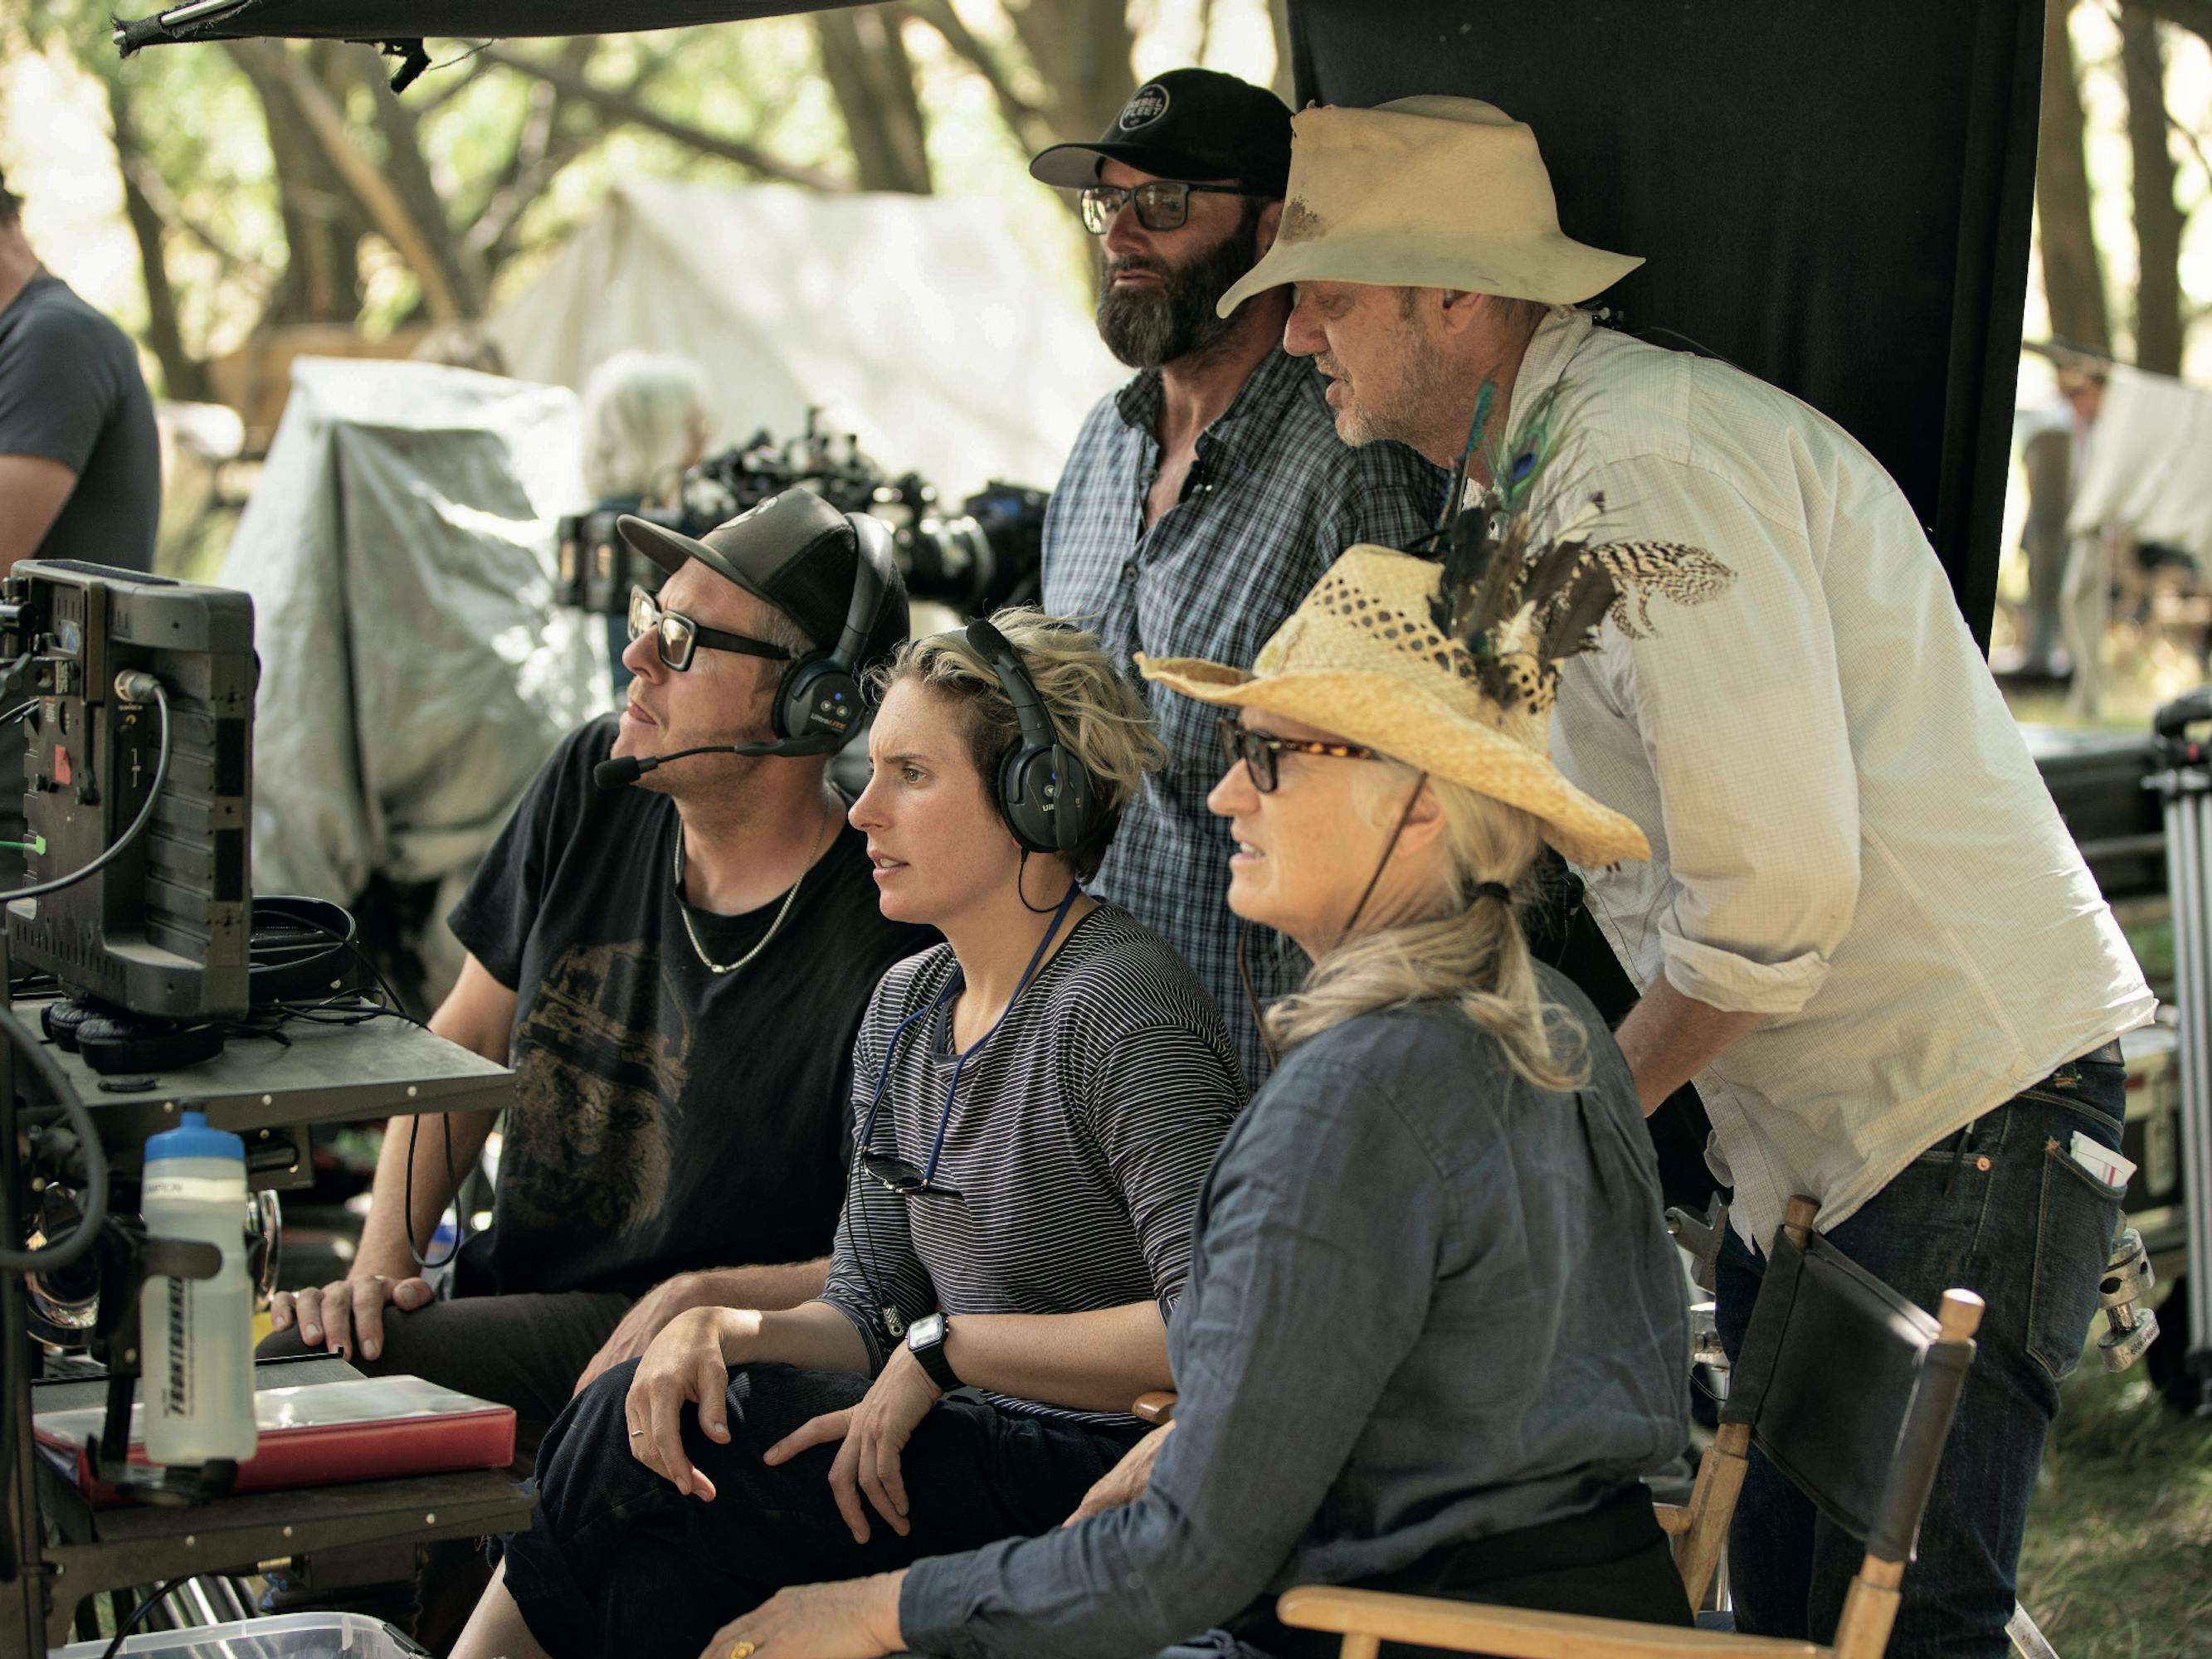 Jane Campion and The Power of the Dog crew stand together looking at something off camera. Campion wears a straw hat, grey shirt, and chunky glasses.